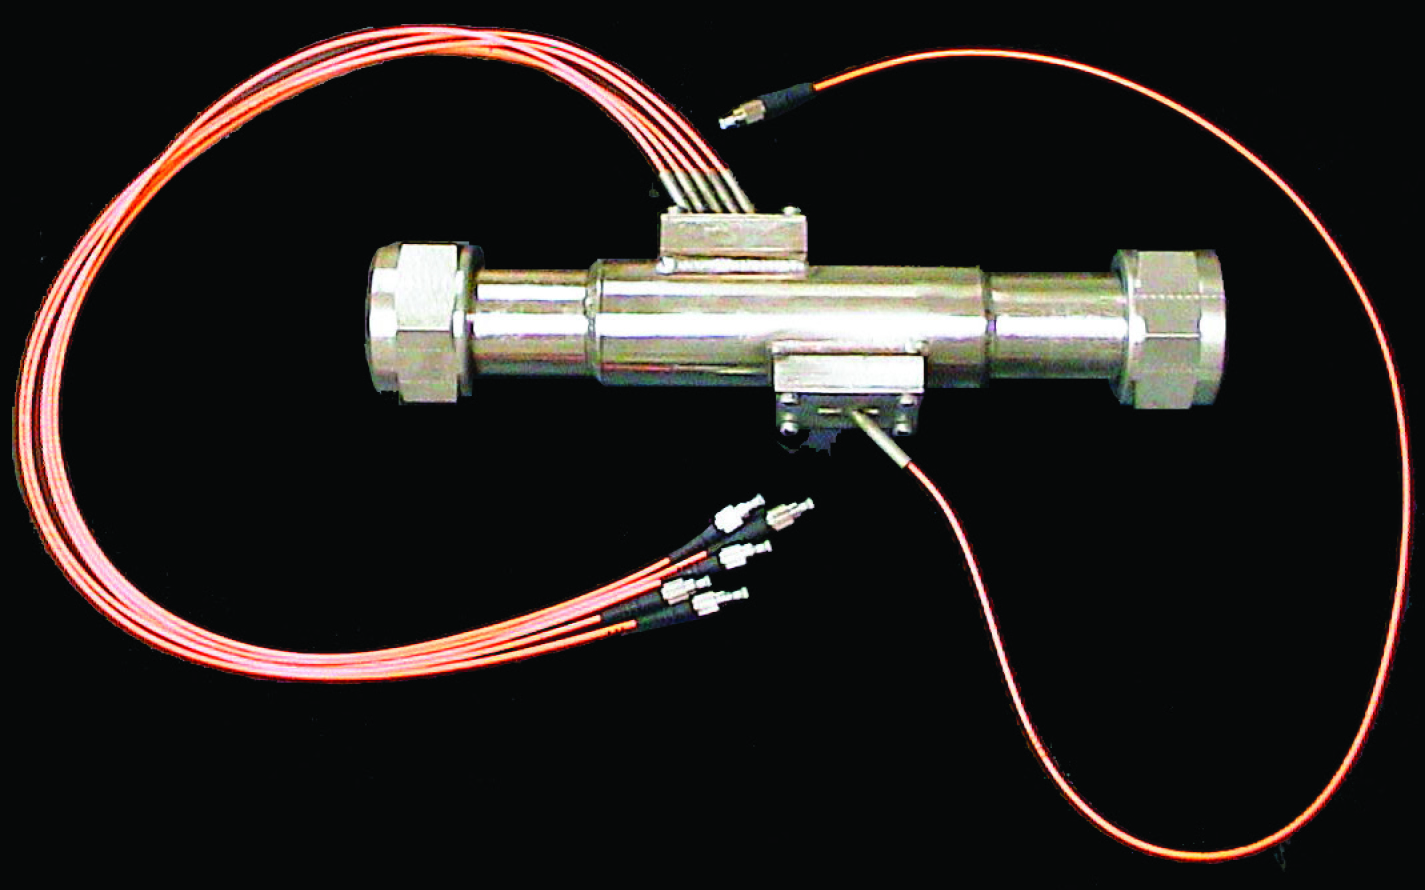 The NASA optical mass flow sensor as designed for in-line cryogenic fuel measurements.
